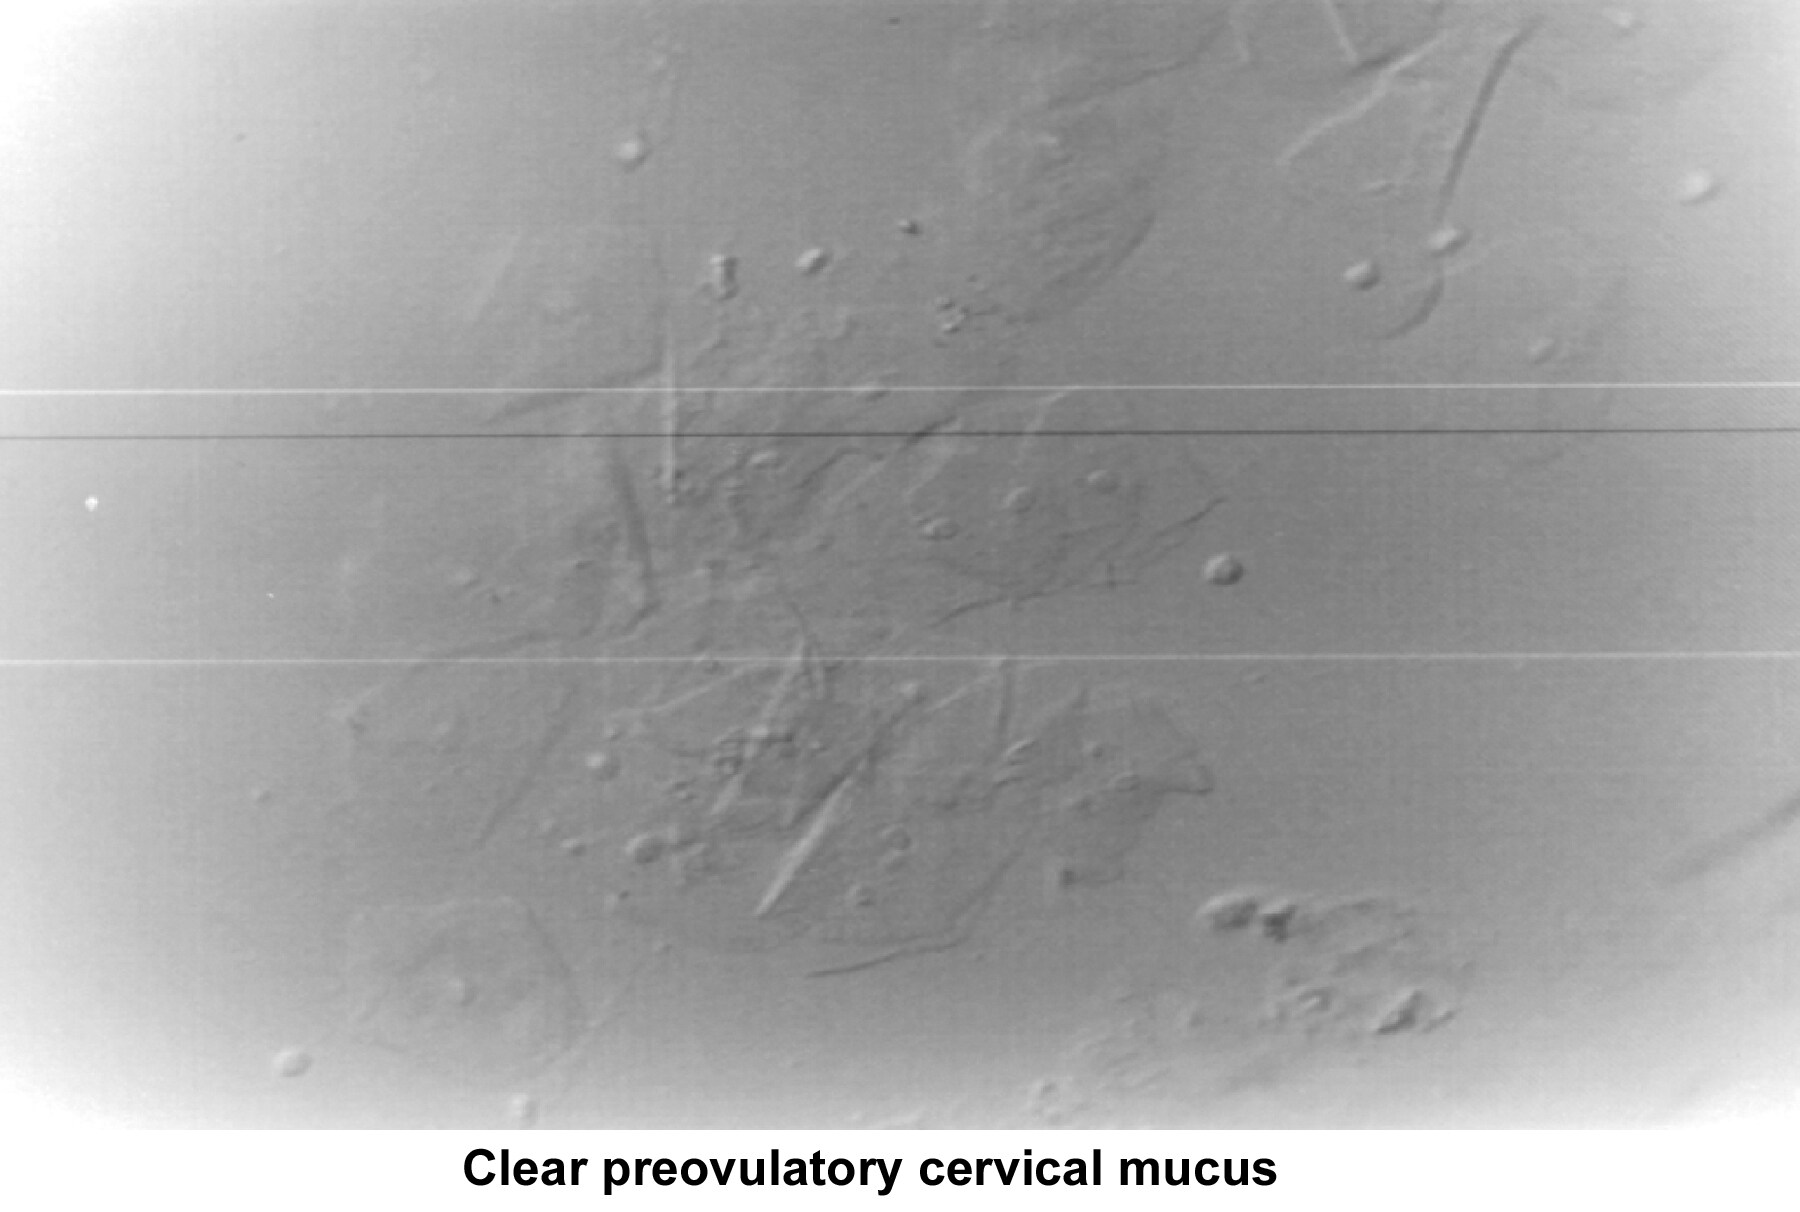 Infertility. Clear preovulatory cervical mucus. I...